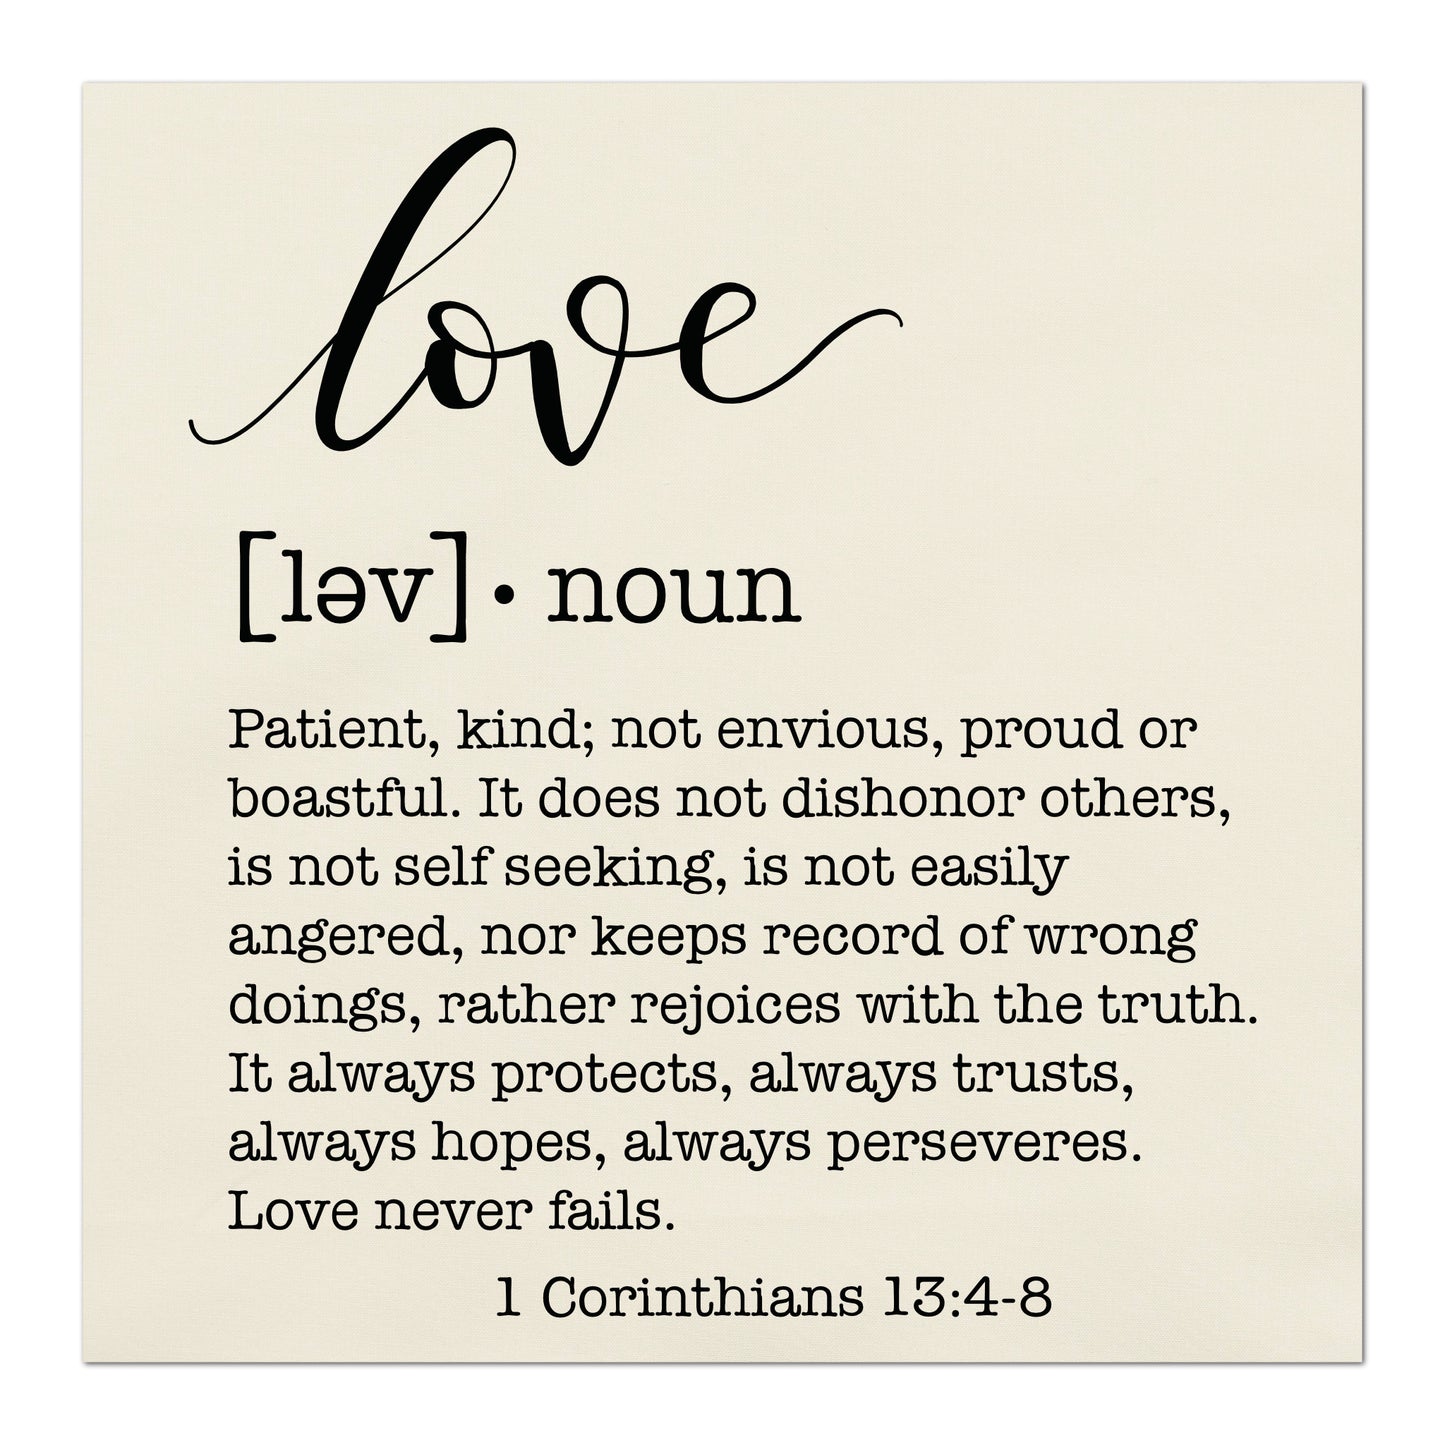 Love Fabric, Patient, kind, not envious, proud or boastful.  It does not dishonor others, is not self seeking, is not easily angered, nor keeps record of wrong doings, rather rejoices with the truth.  It always protects, always trusts, always hopes, always perseveres. Love never fails. - 1 Corinthians 13:4-8